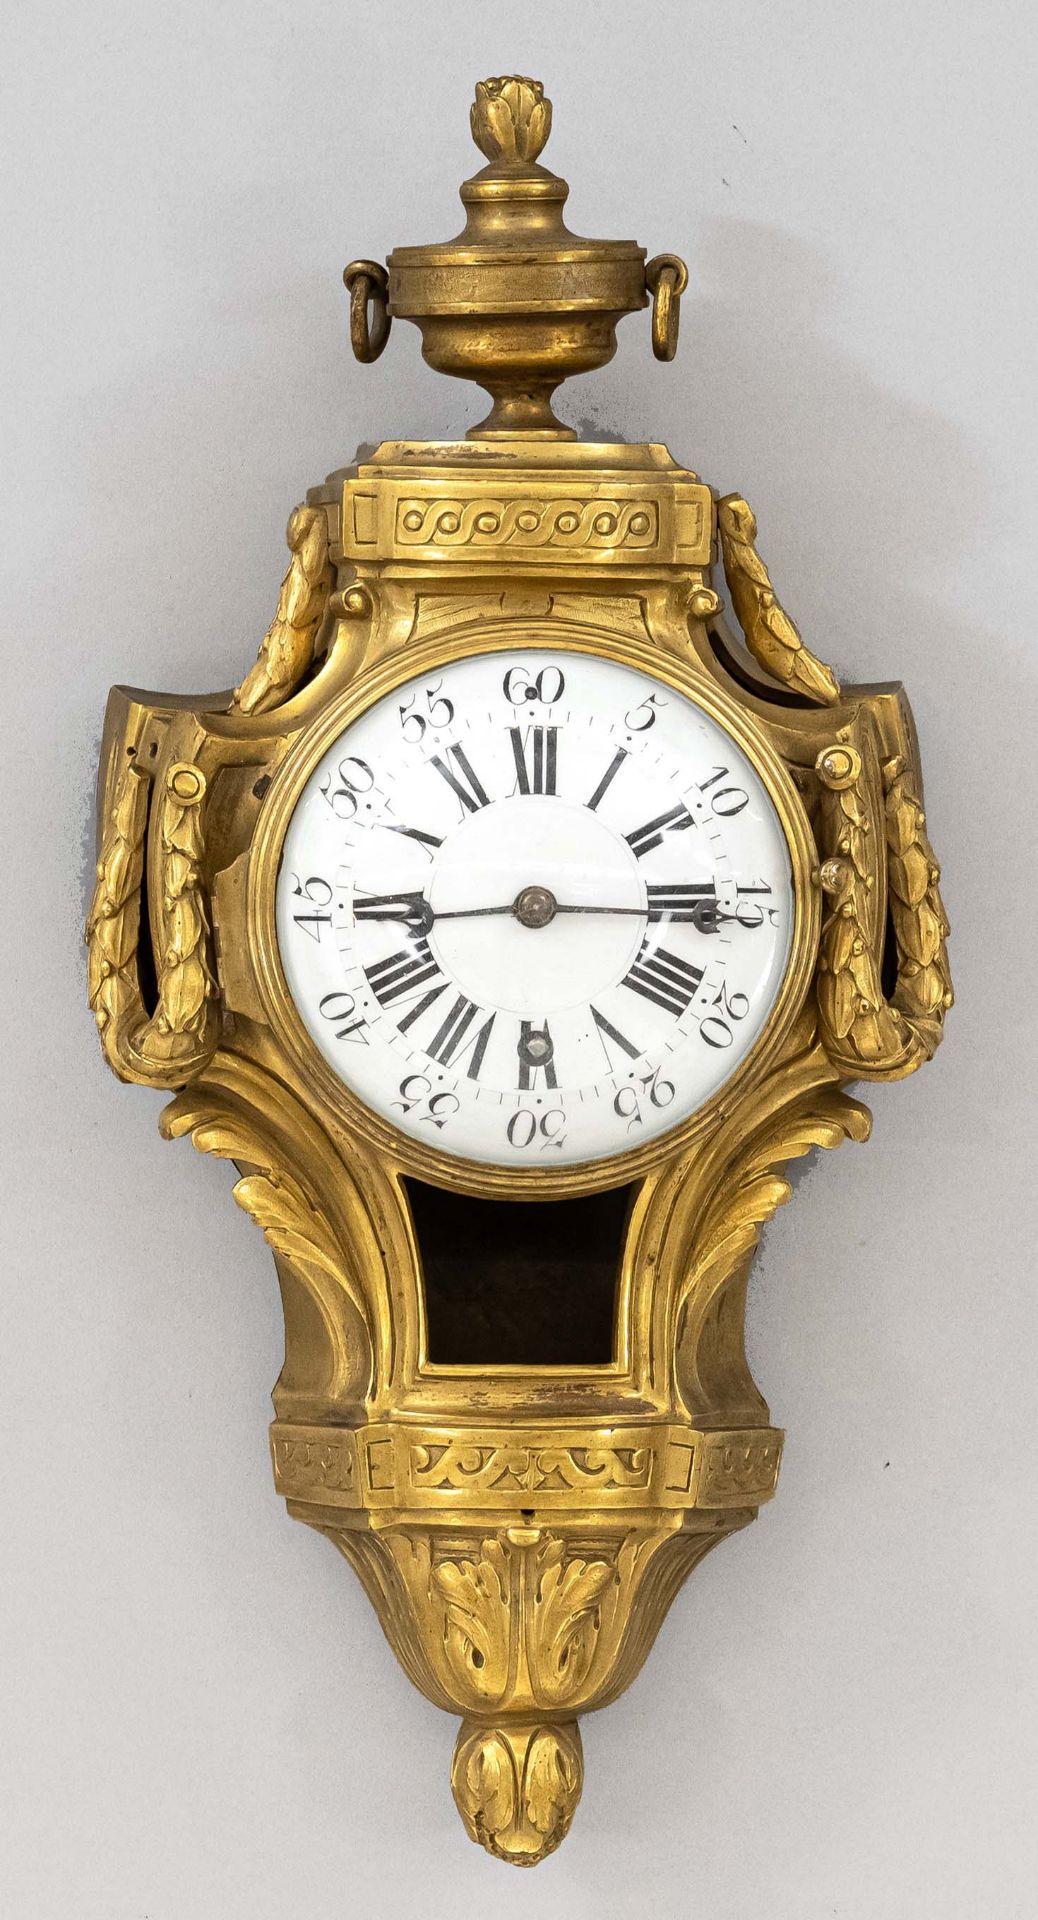 Cartel clock, 2nd half of the 18th century, cast brass, decorated with tendrils, acanthus leaves,